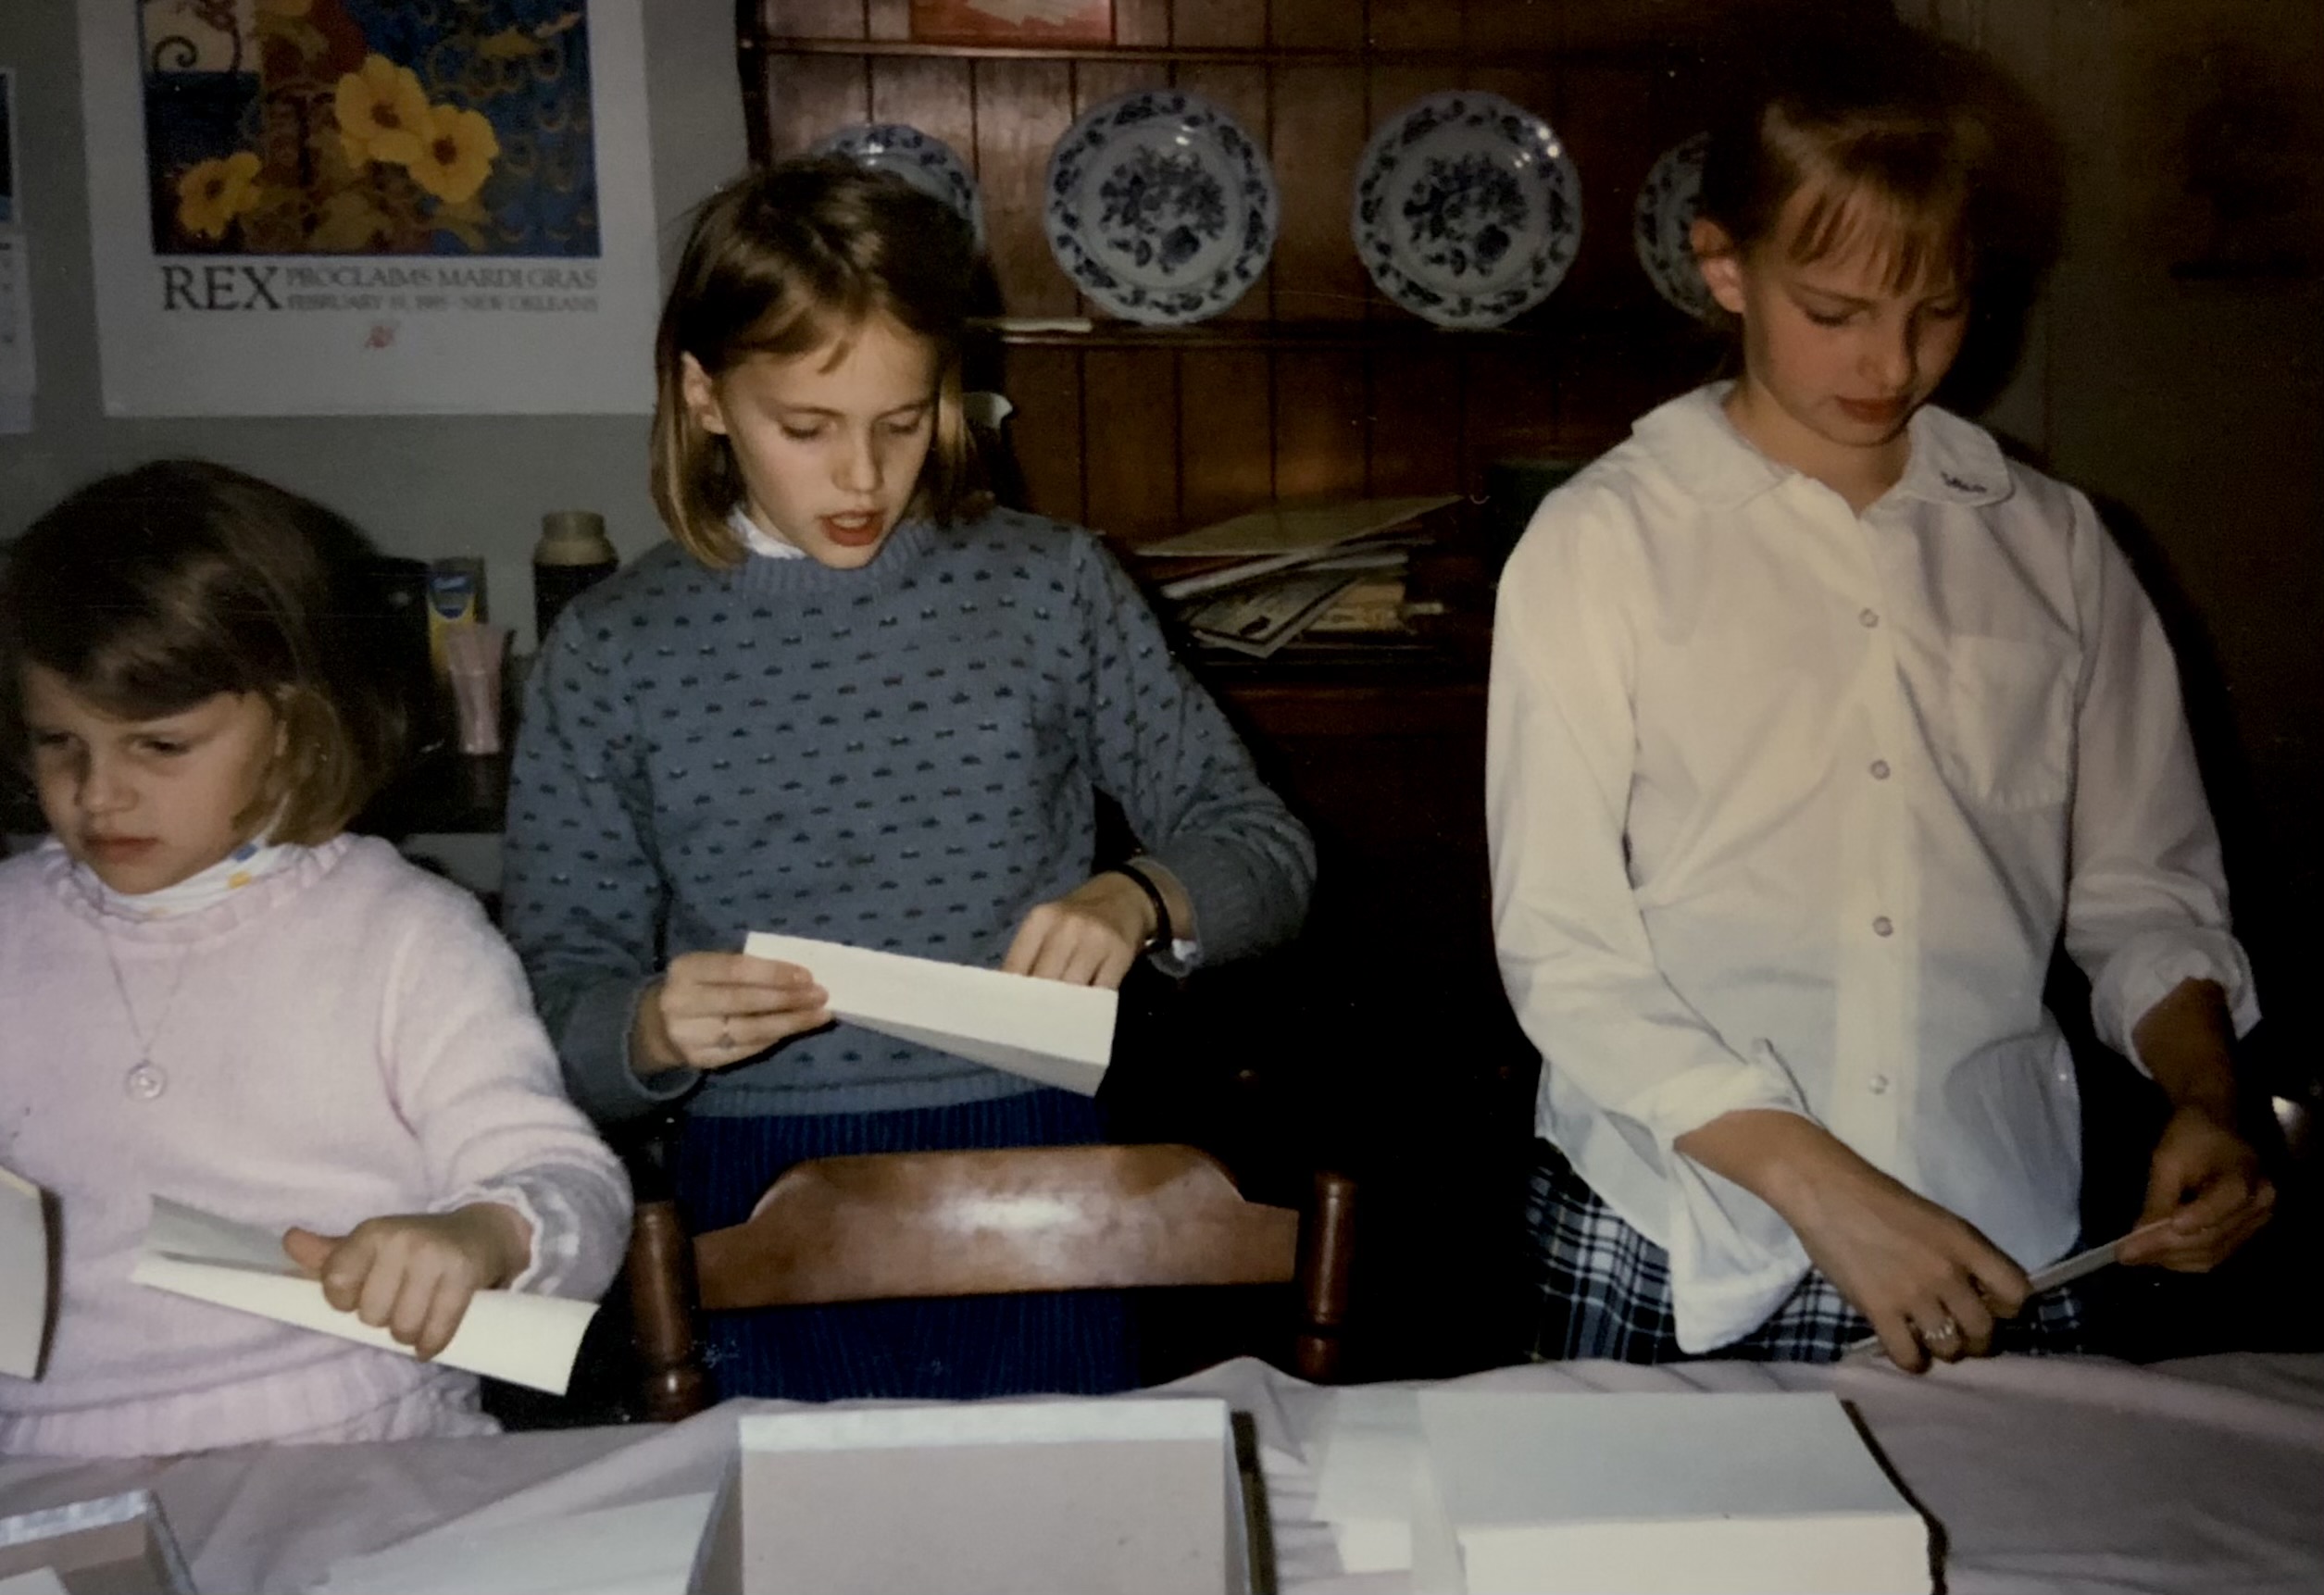 You are currently viewing Helping with a mailing, Academy Kitchen, 1980’s